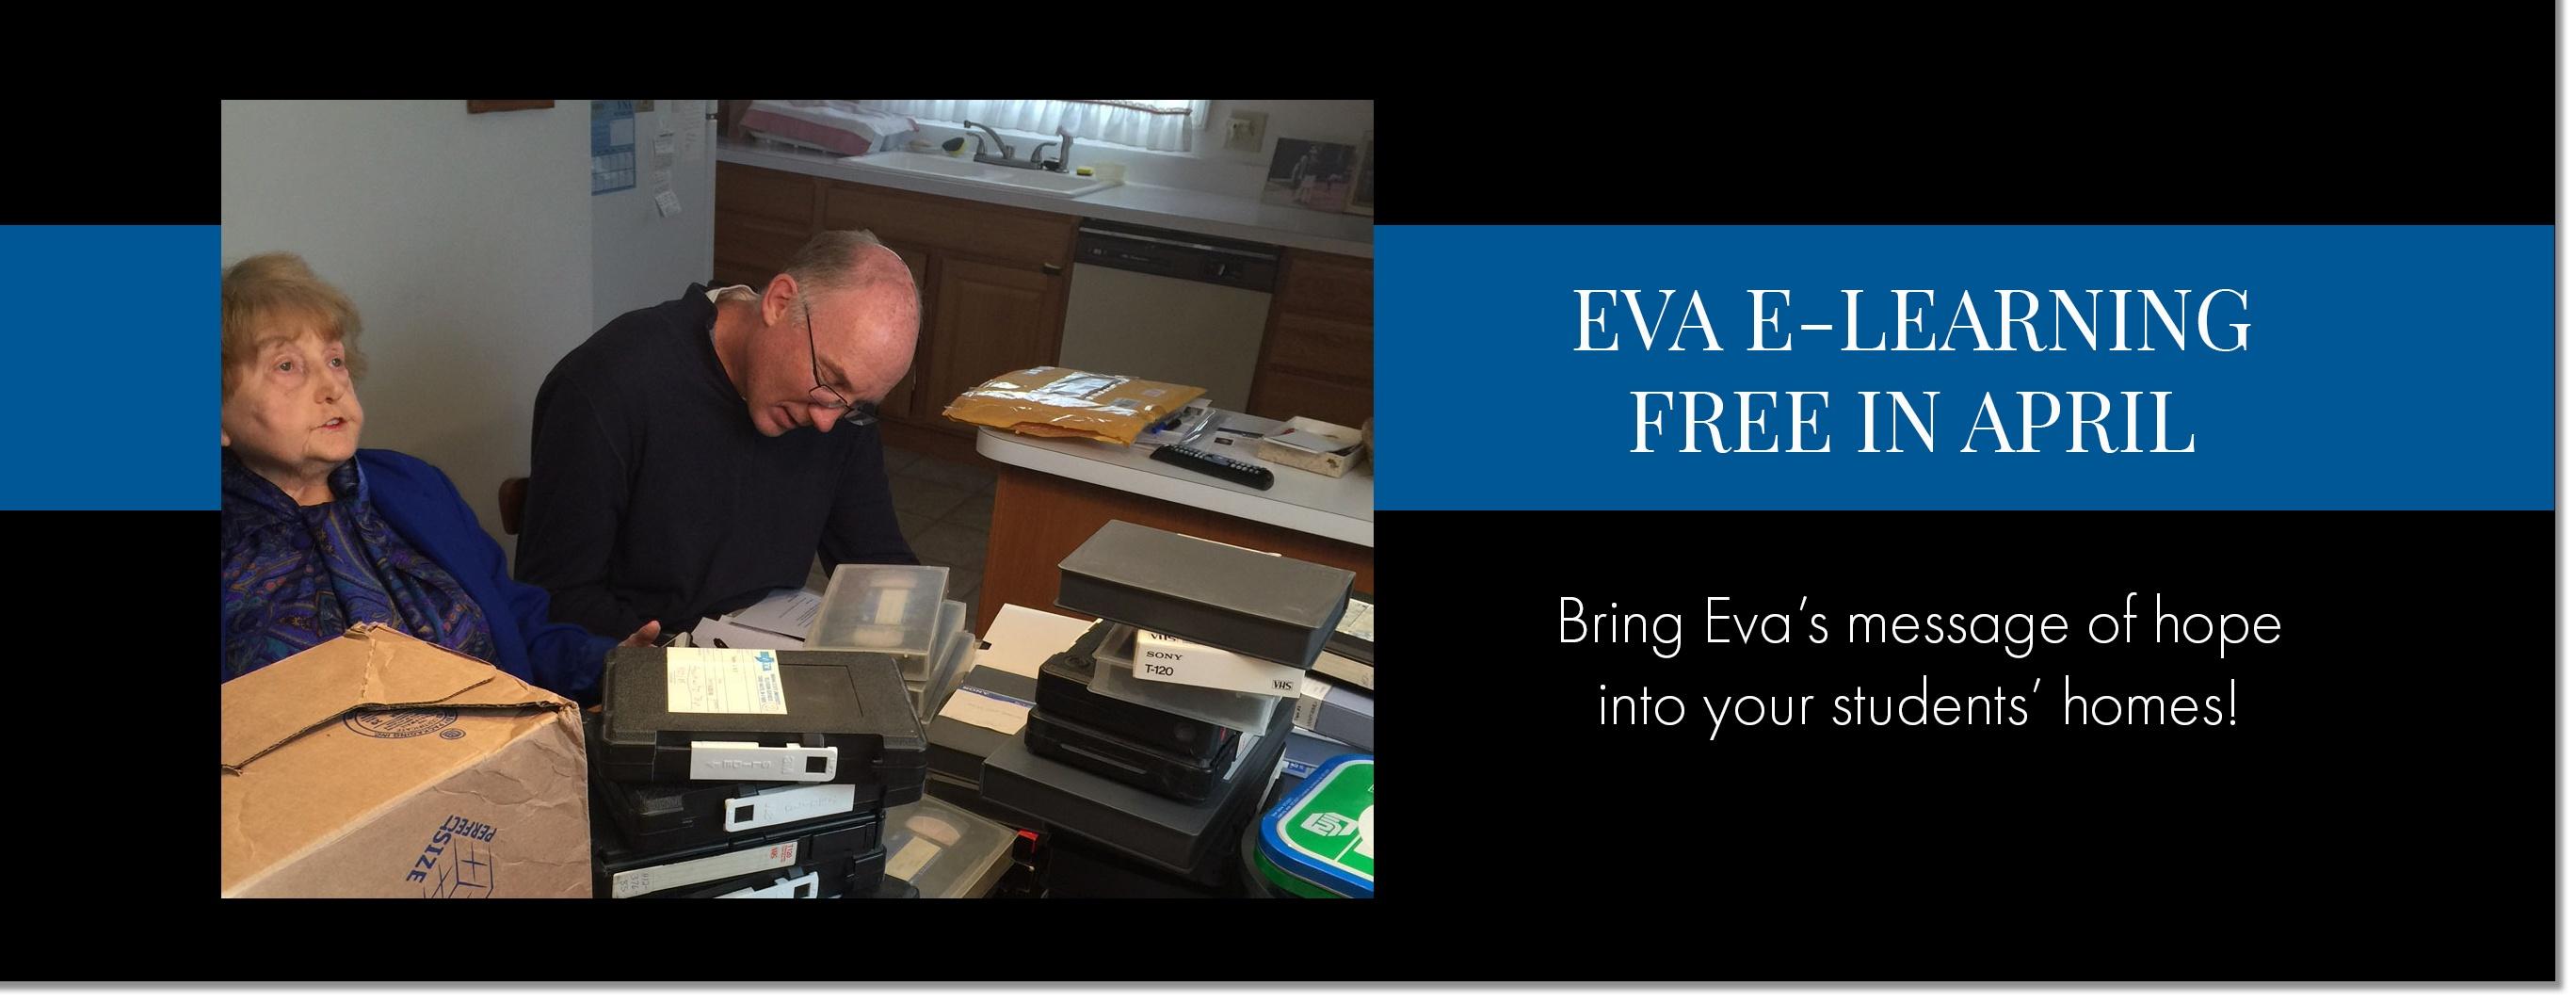 EVA E-LEARNING FREE IN APRIL Bring Eva's message of hope into your students' homes!